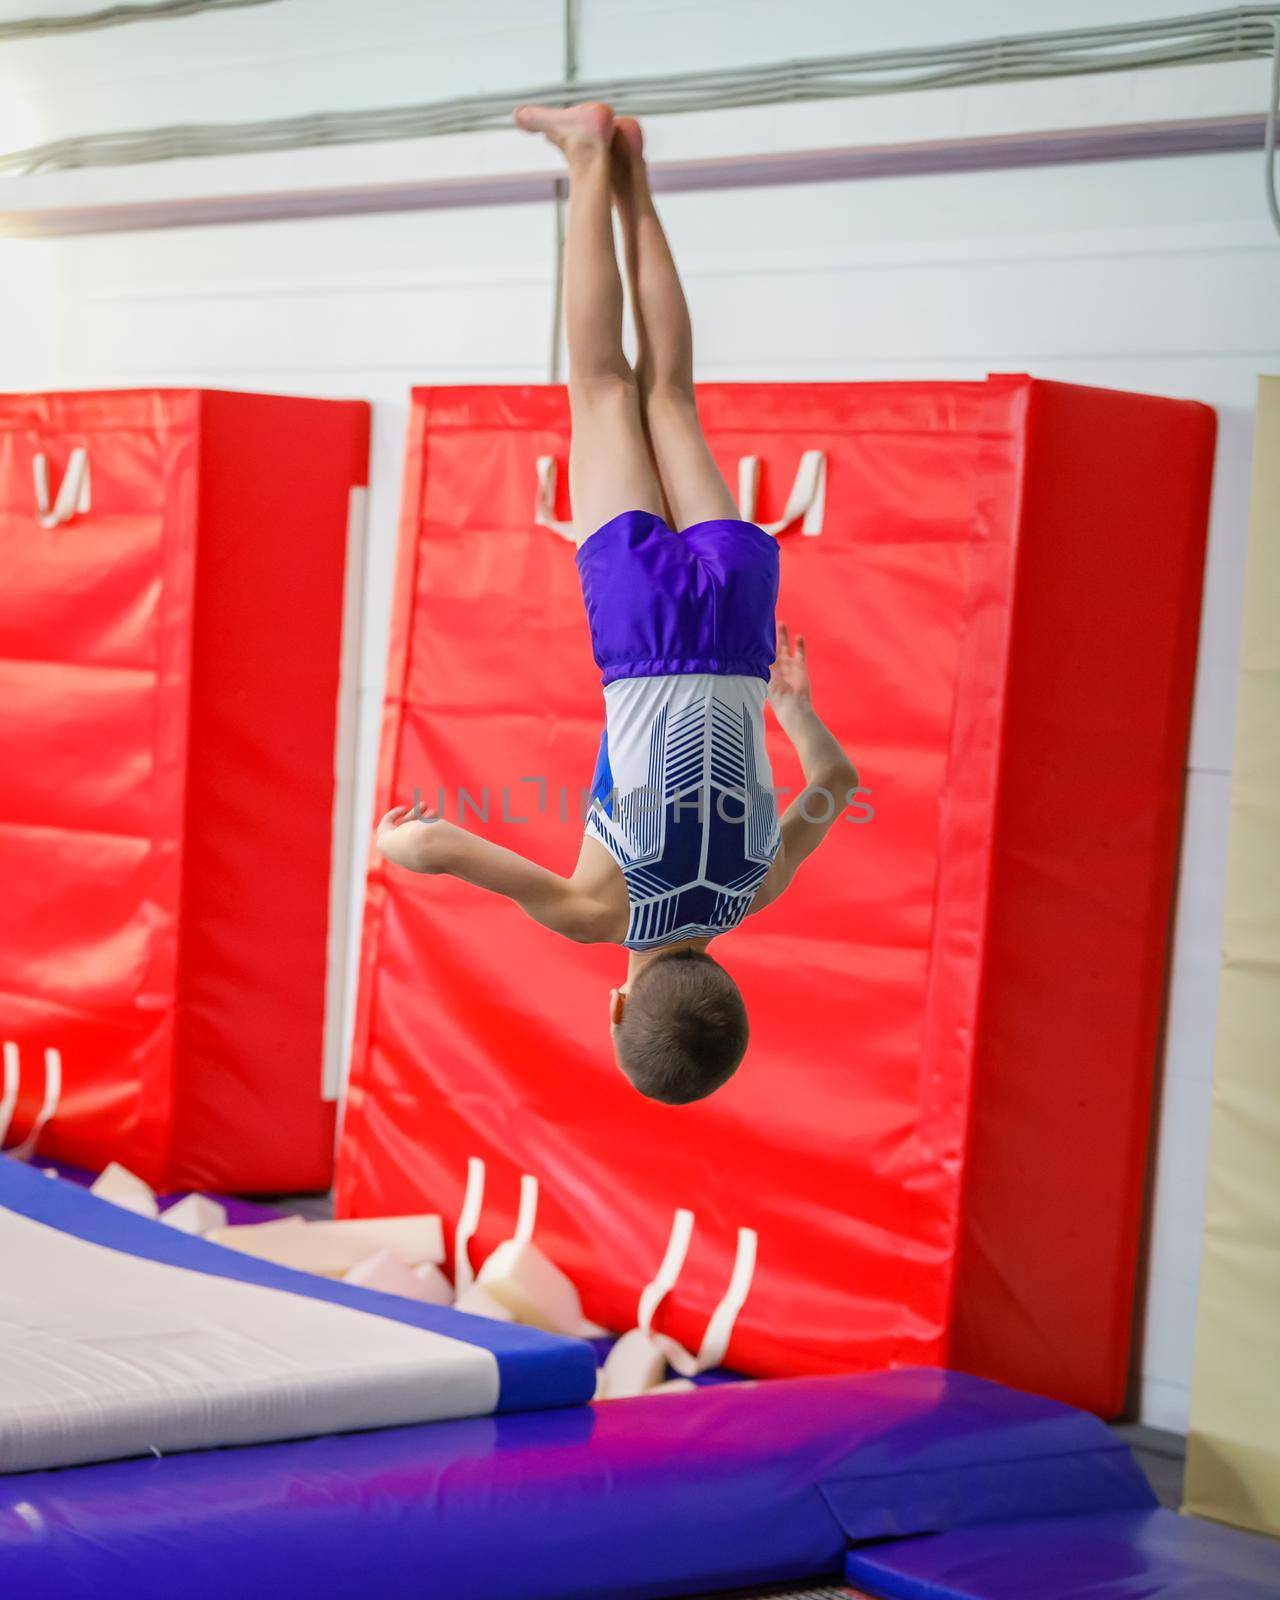 A young athlete performs a jump somersault in the gym. by Yurich32